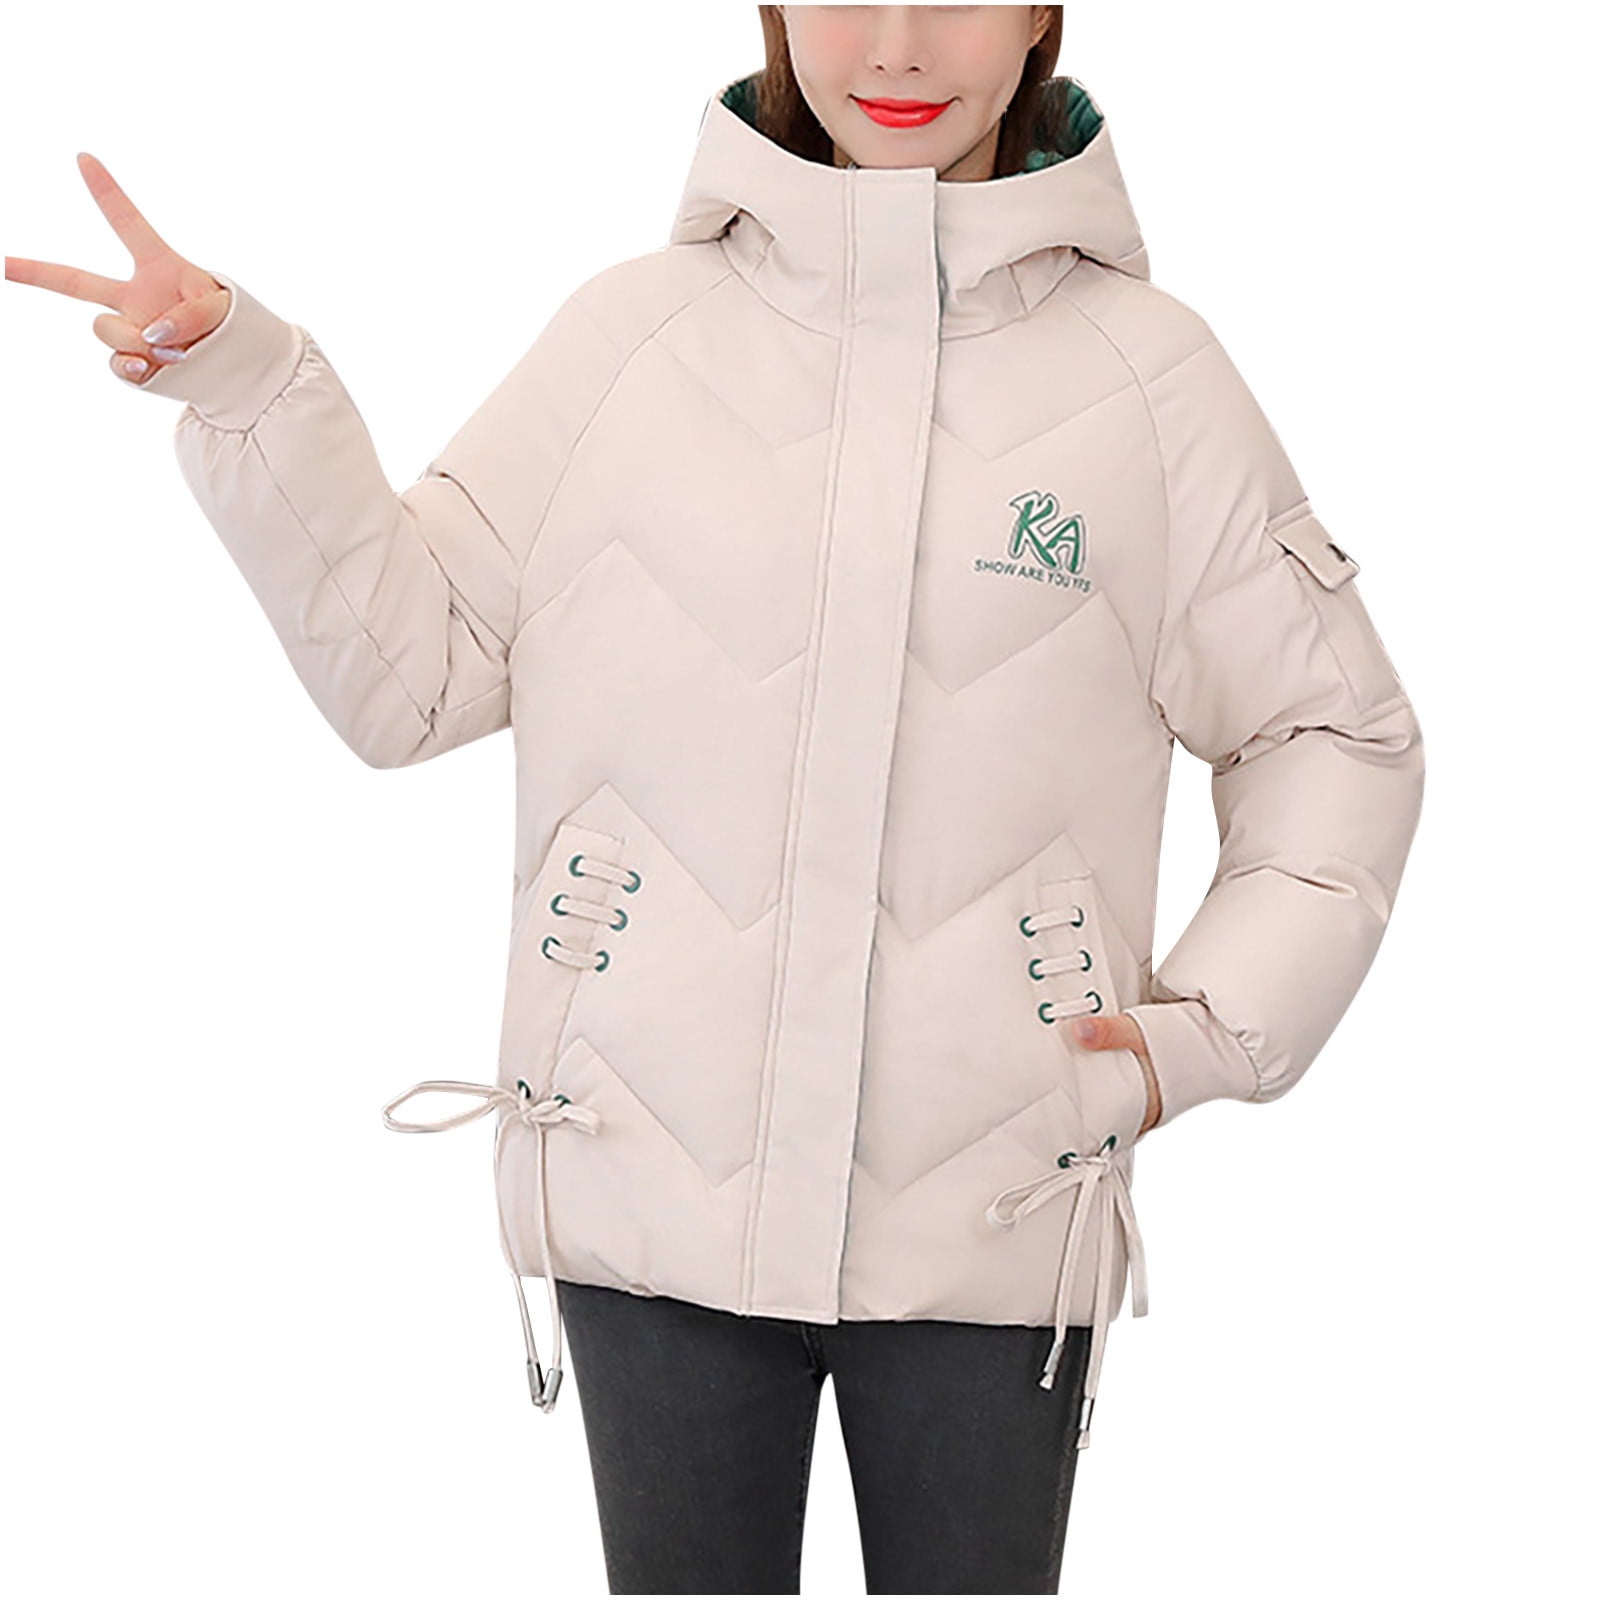 Olyvenn Stylish Woman Fashion Long Sleeves Comfortable Loose Tops Hooded  Long Coat Blouse Cold Weather Thicken Furry Lined Thermal Down Jackets  White